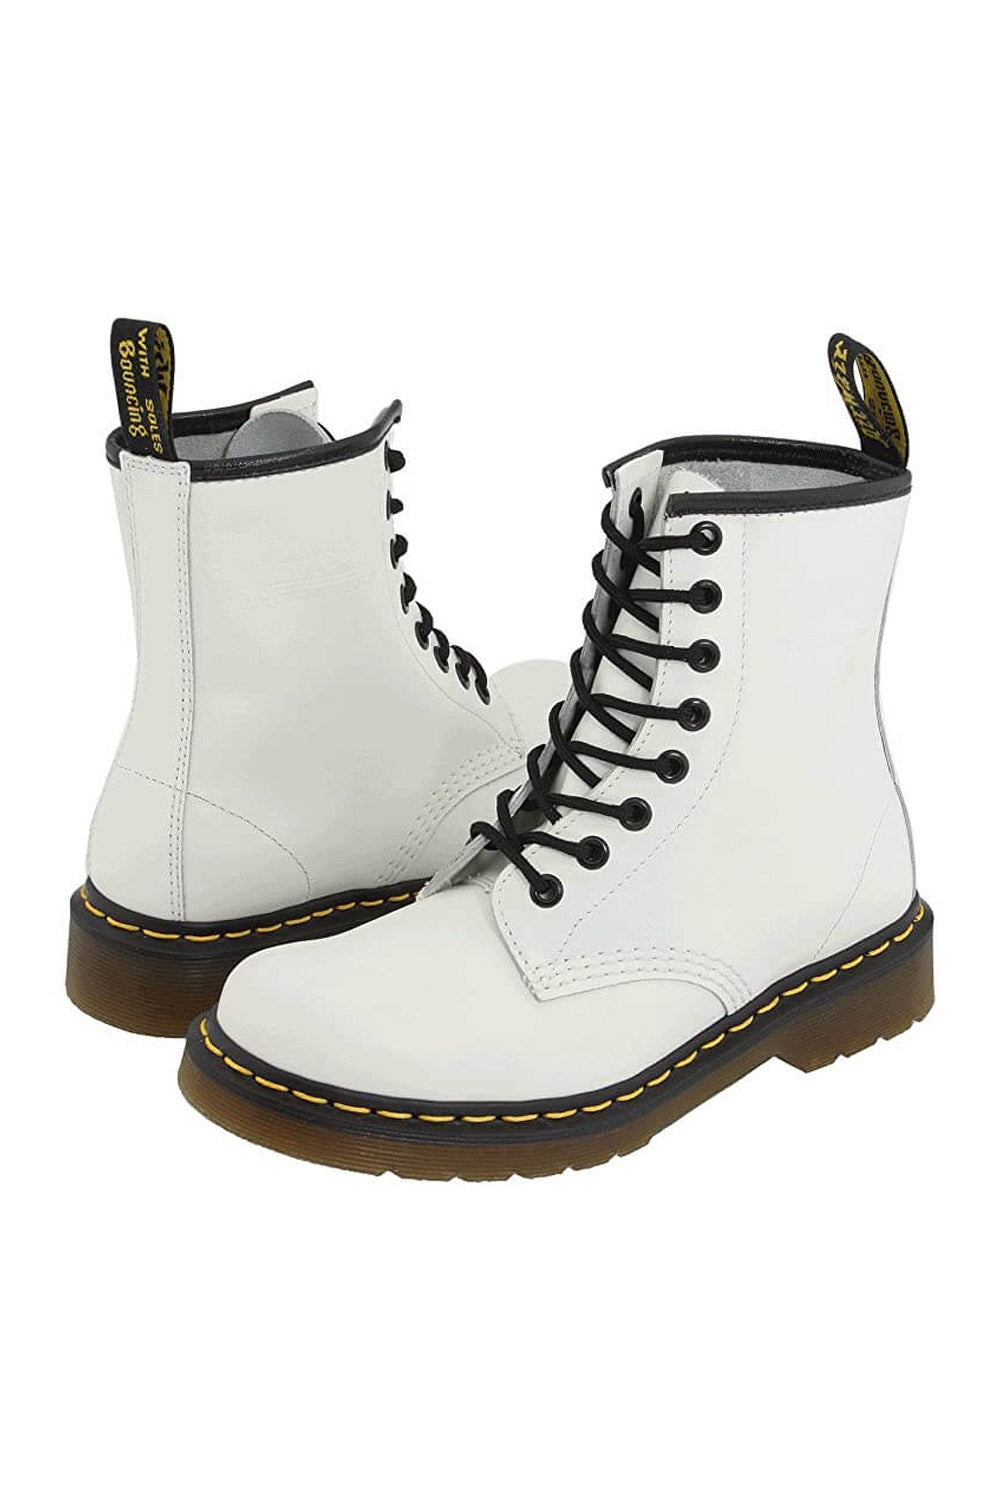 Dr. Martens 1460 Smooth Leather Boots for Women in White